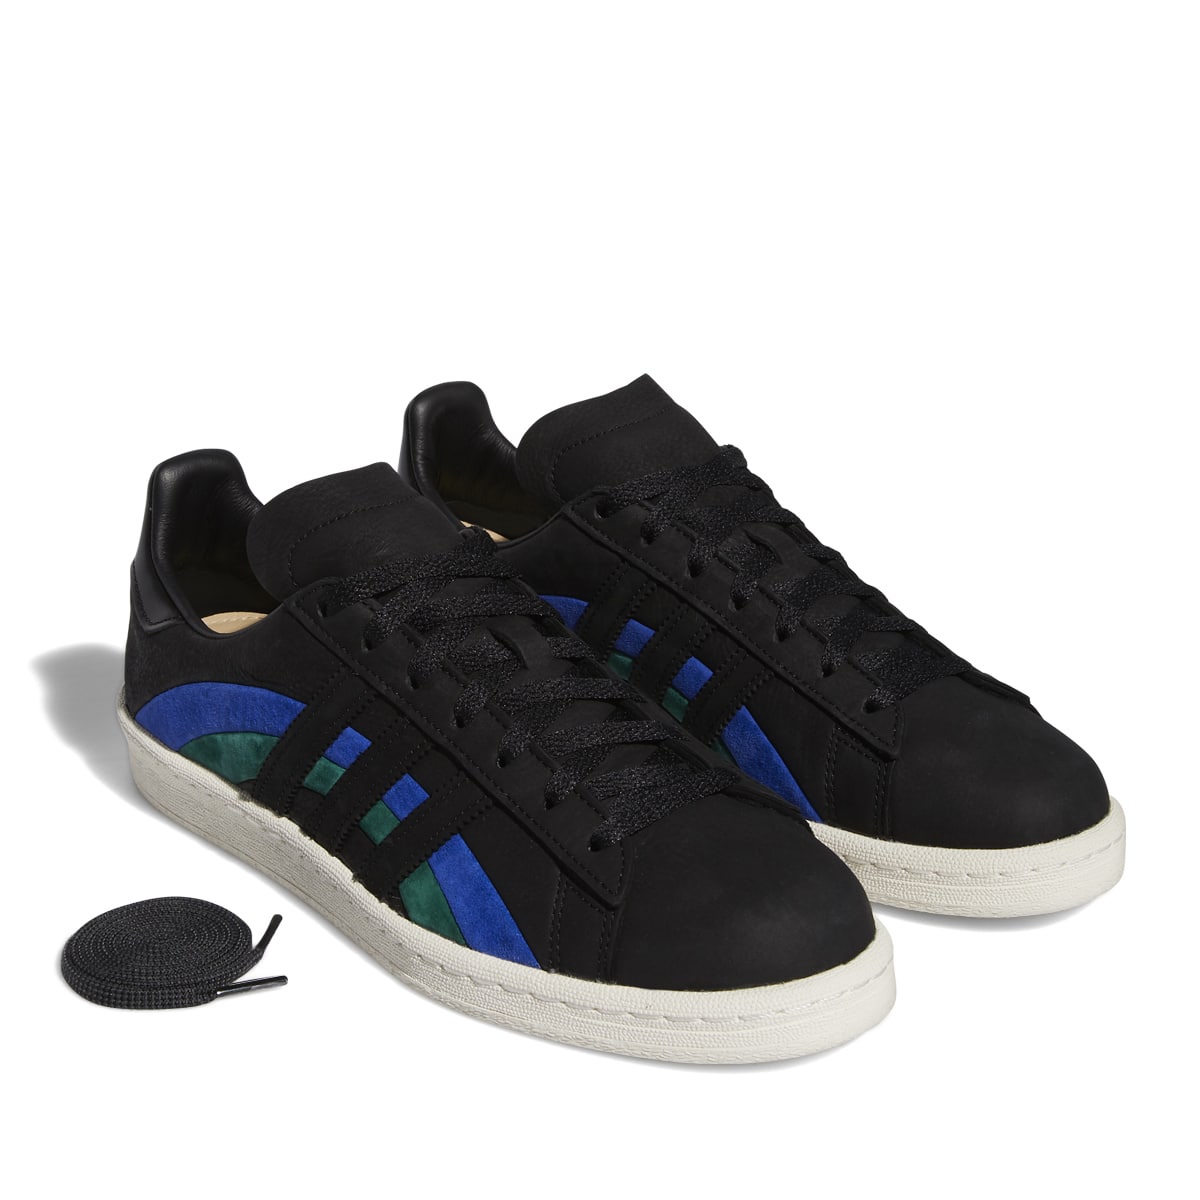 adidas CAMPUS 80 BOOKWORKS CORE BLACK/BOLD BLUE/CALLEGE GREEN 21FW-S_photo_large